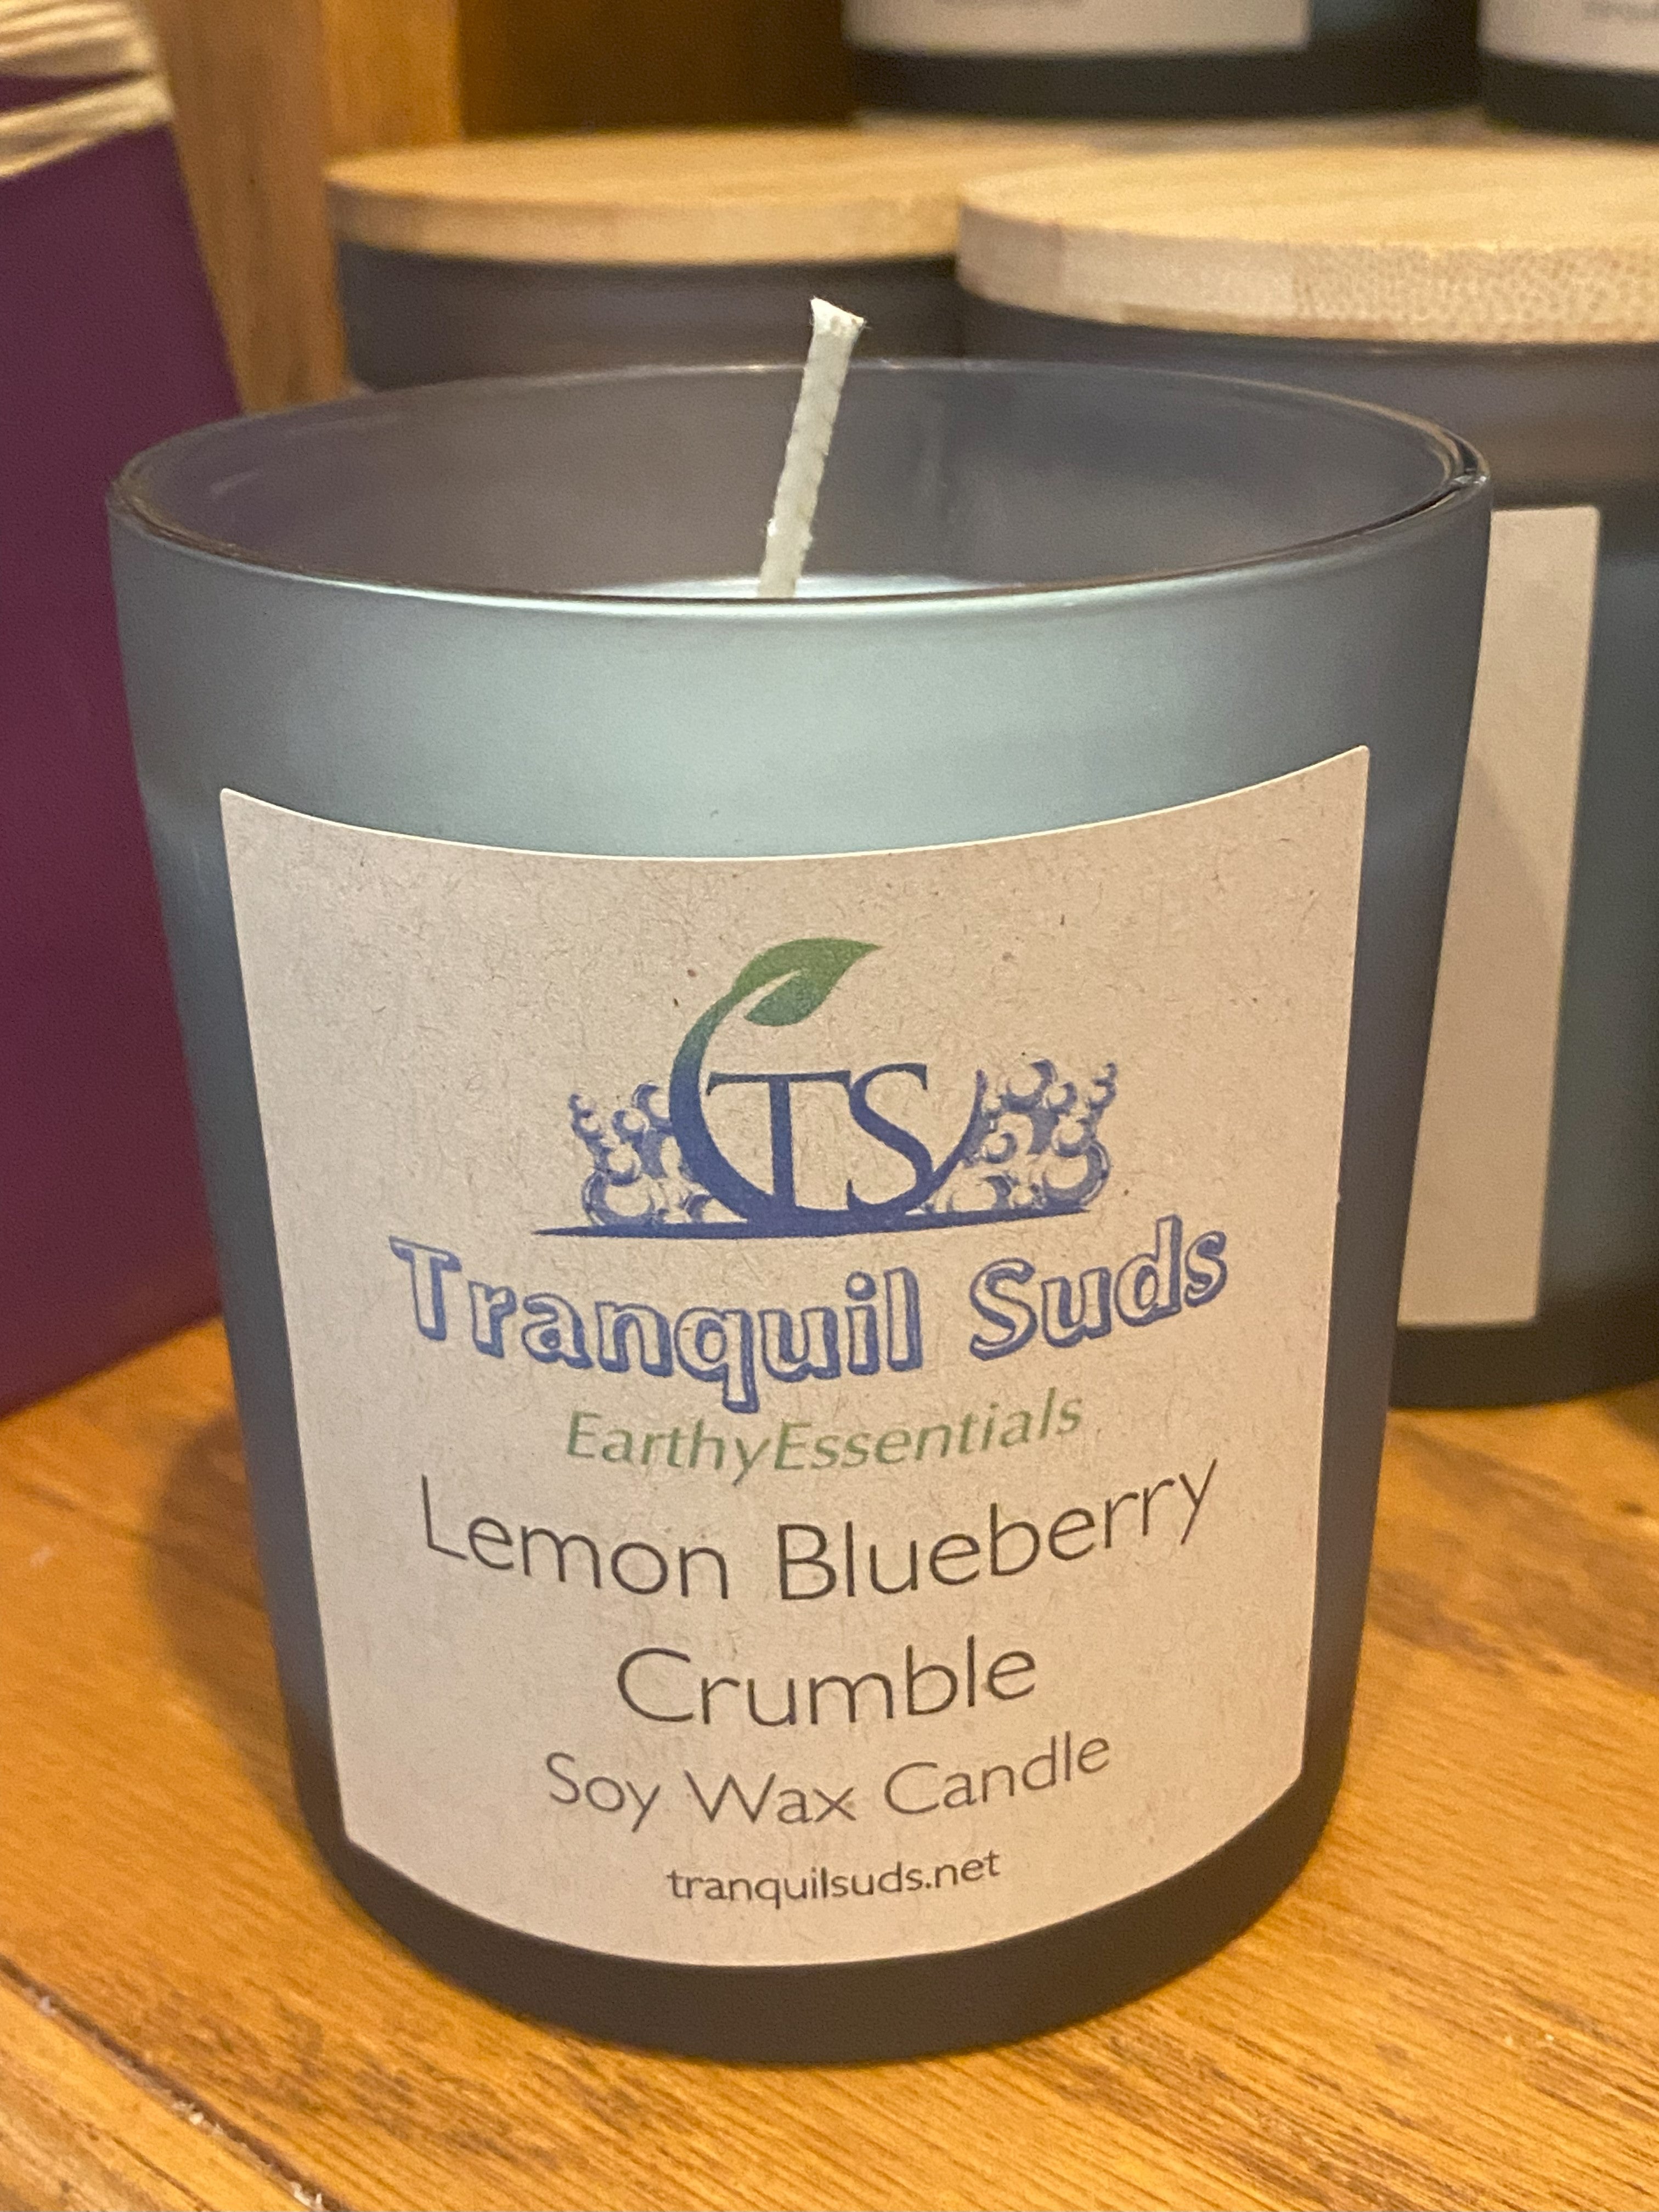 Lemon Blueberry Crumble Soy Wax Candle